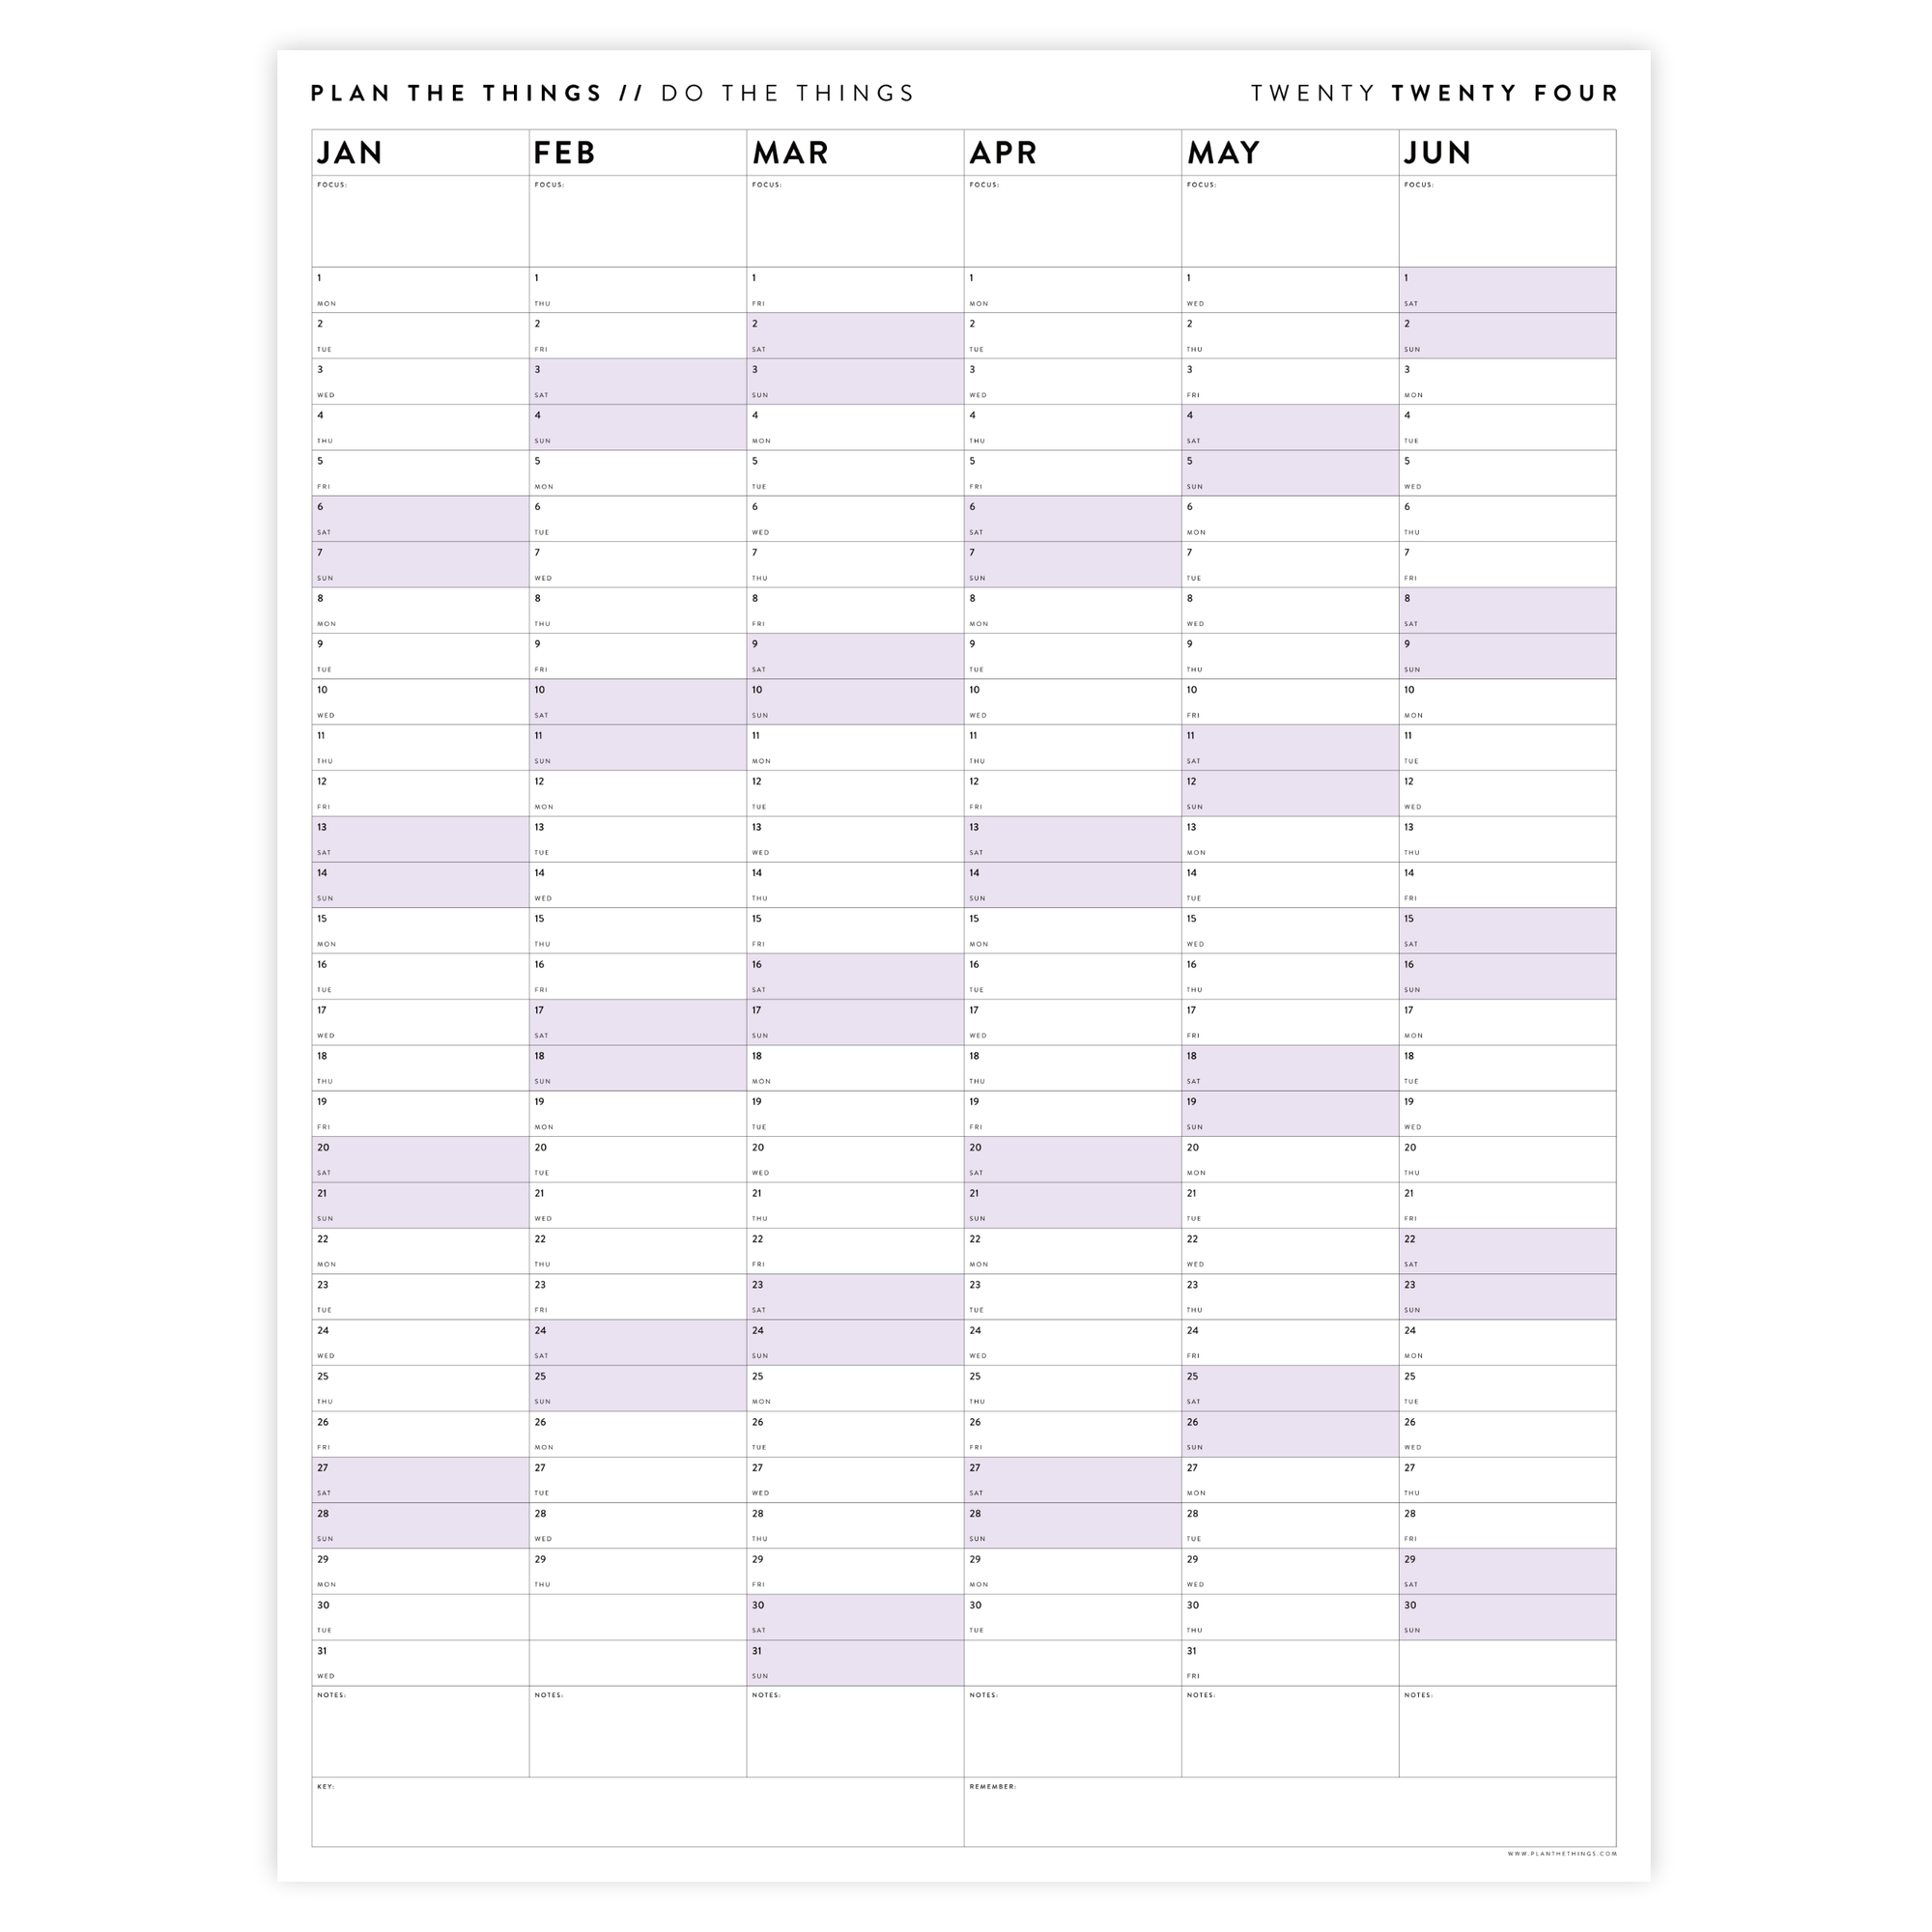 SIX MONTH 2024 GIANT WALL CALENDAR (JANUARY TO JUNE)  WITH PURPLE WEEKENDS